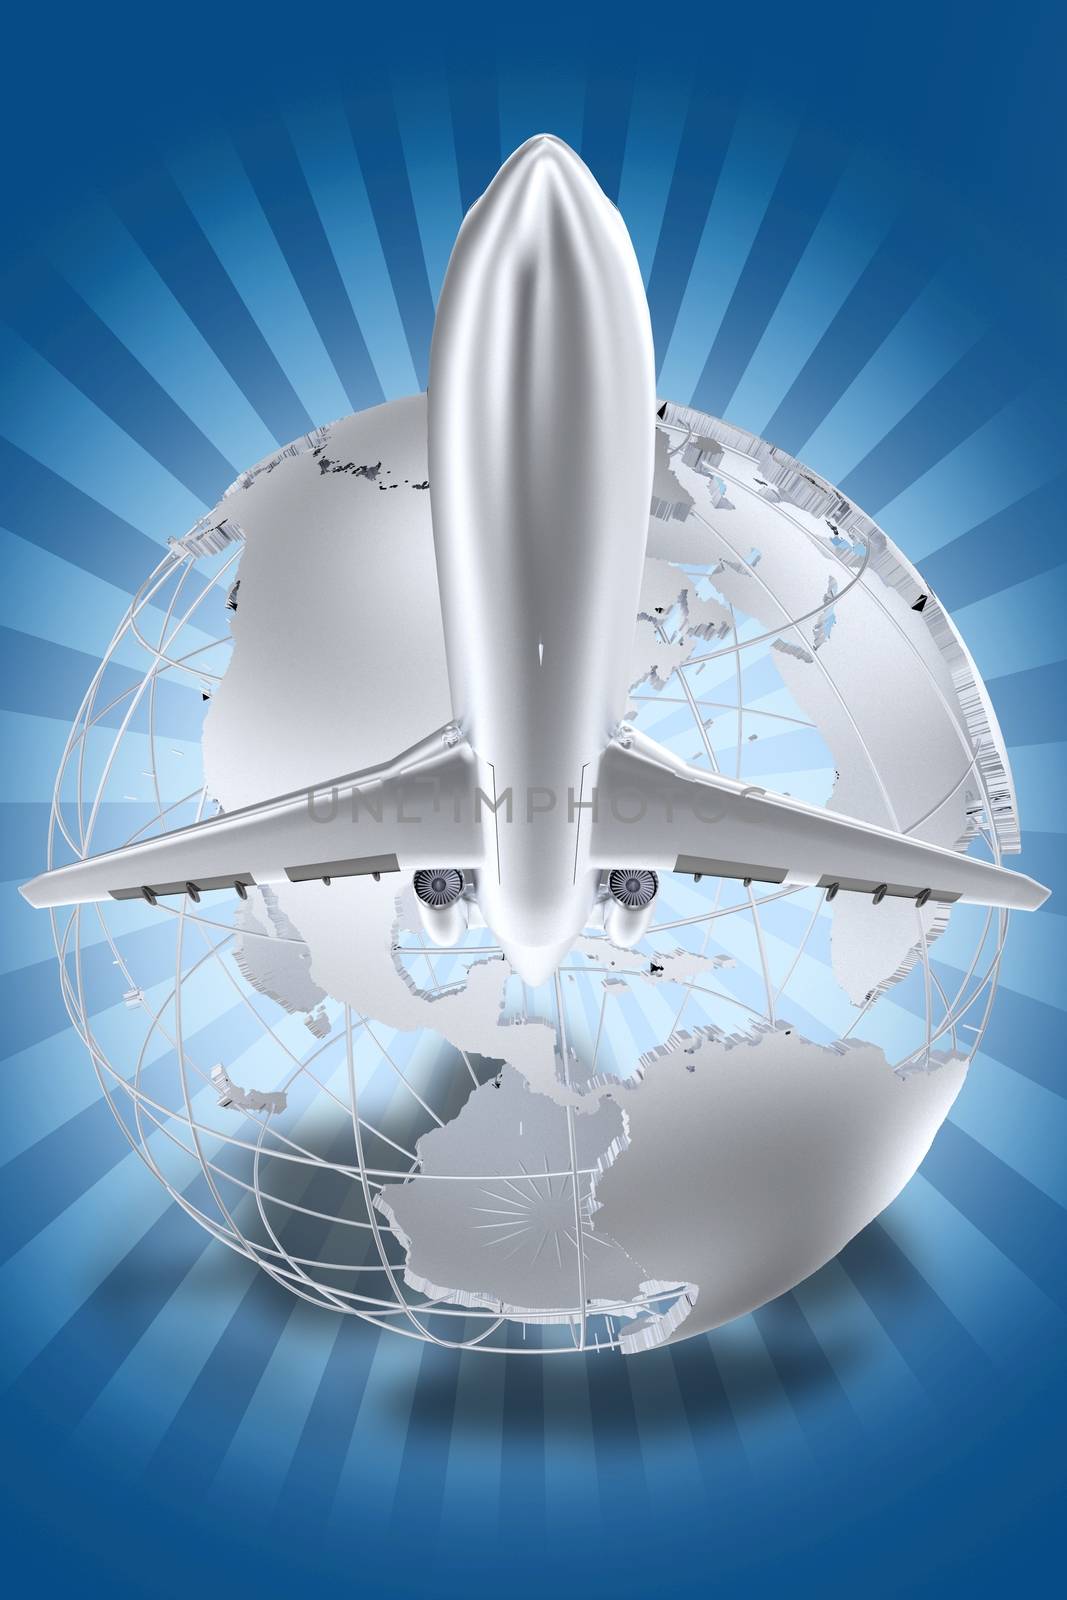 Airlines Theme. SShiny Silver Globe with Flying Airplane Logo/Symbol. Blue Background with Light Rays. 3D Render Illustration.